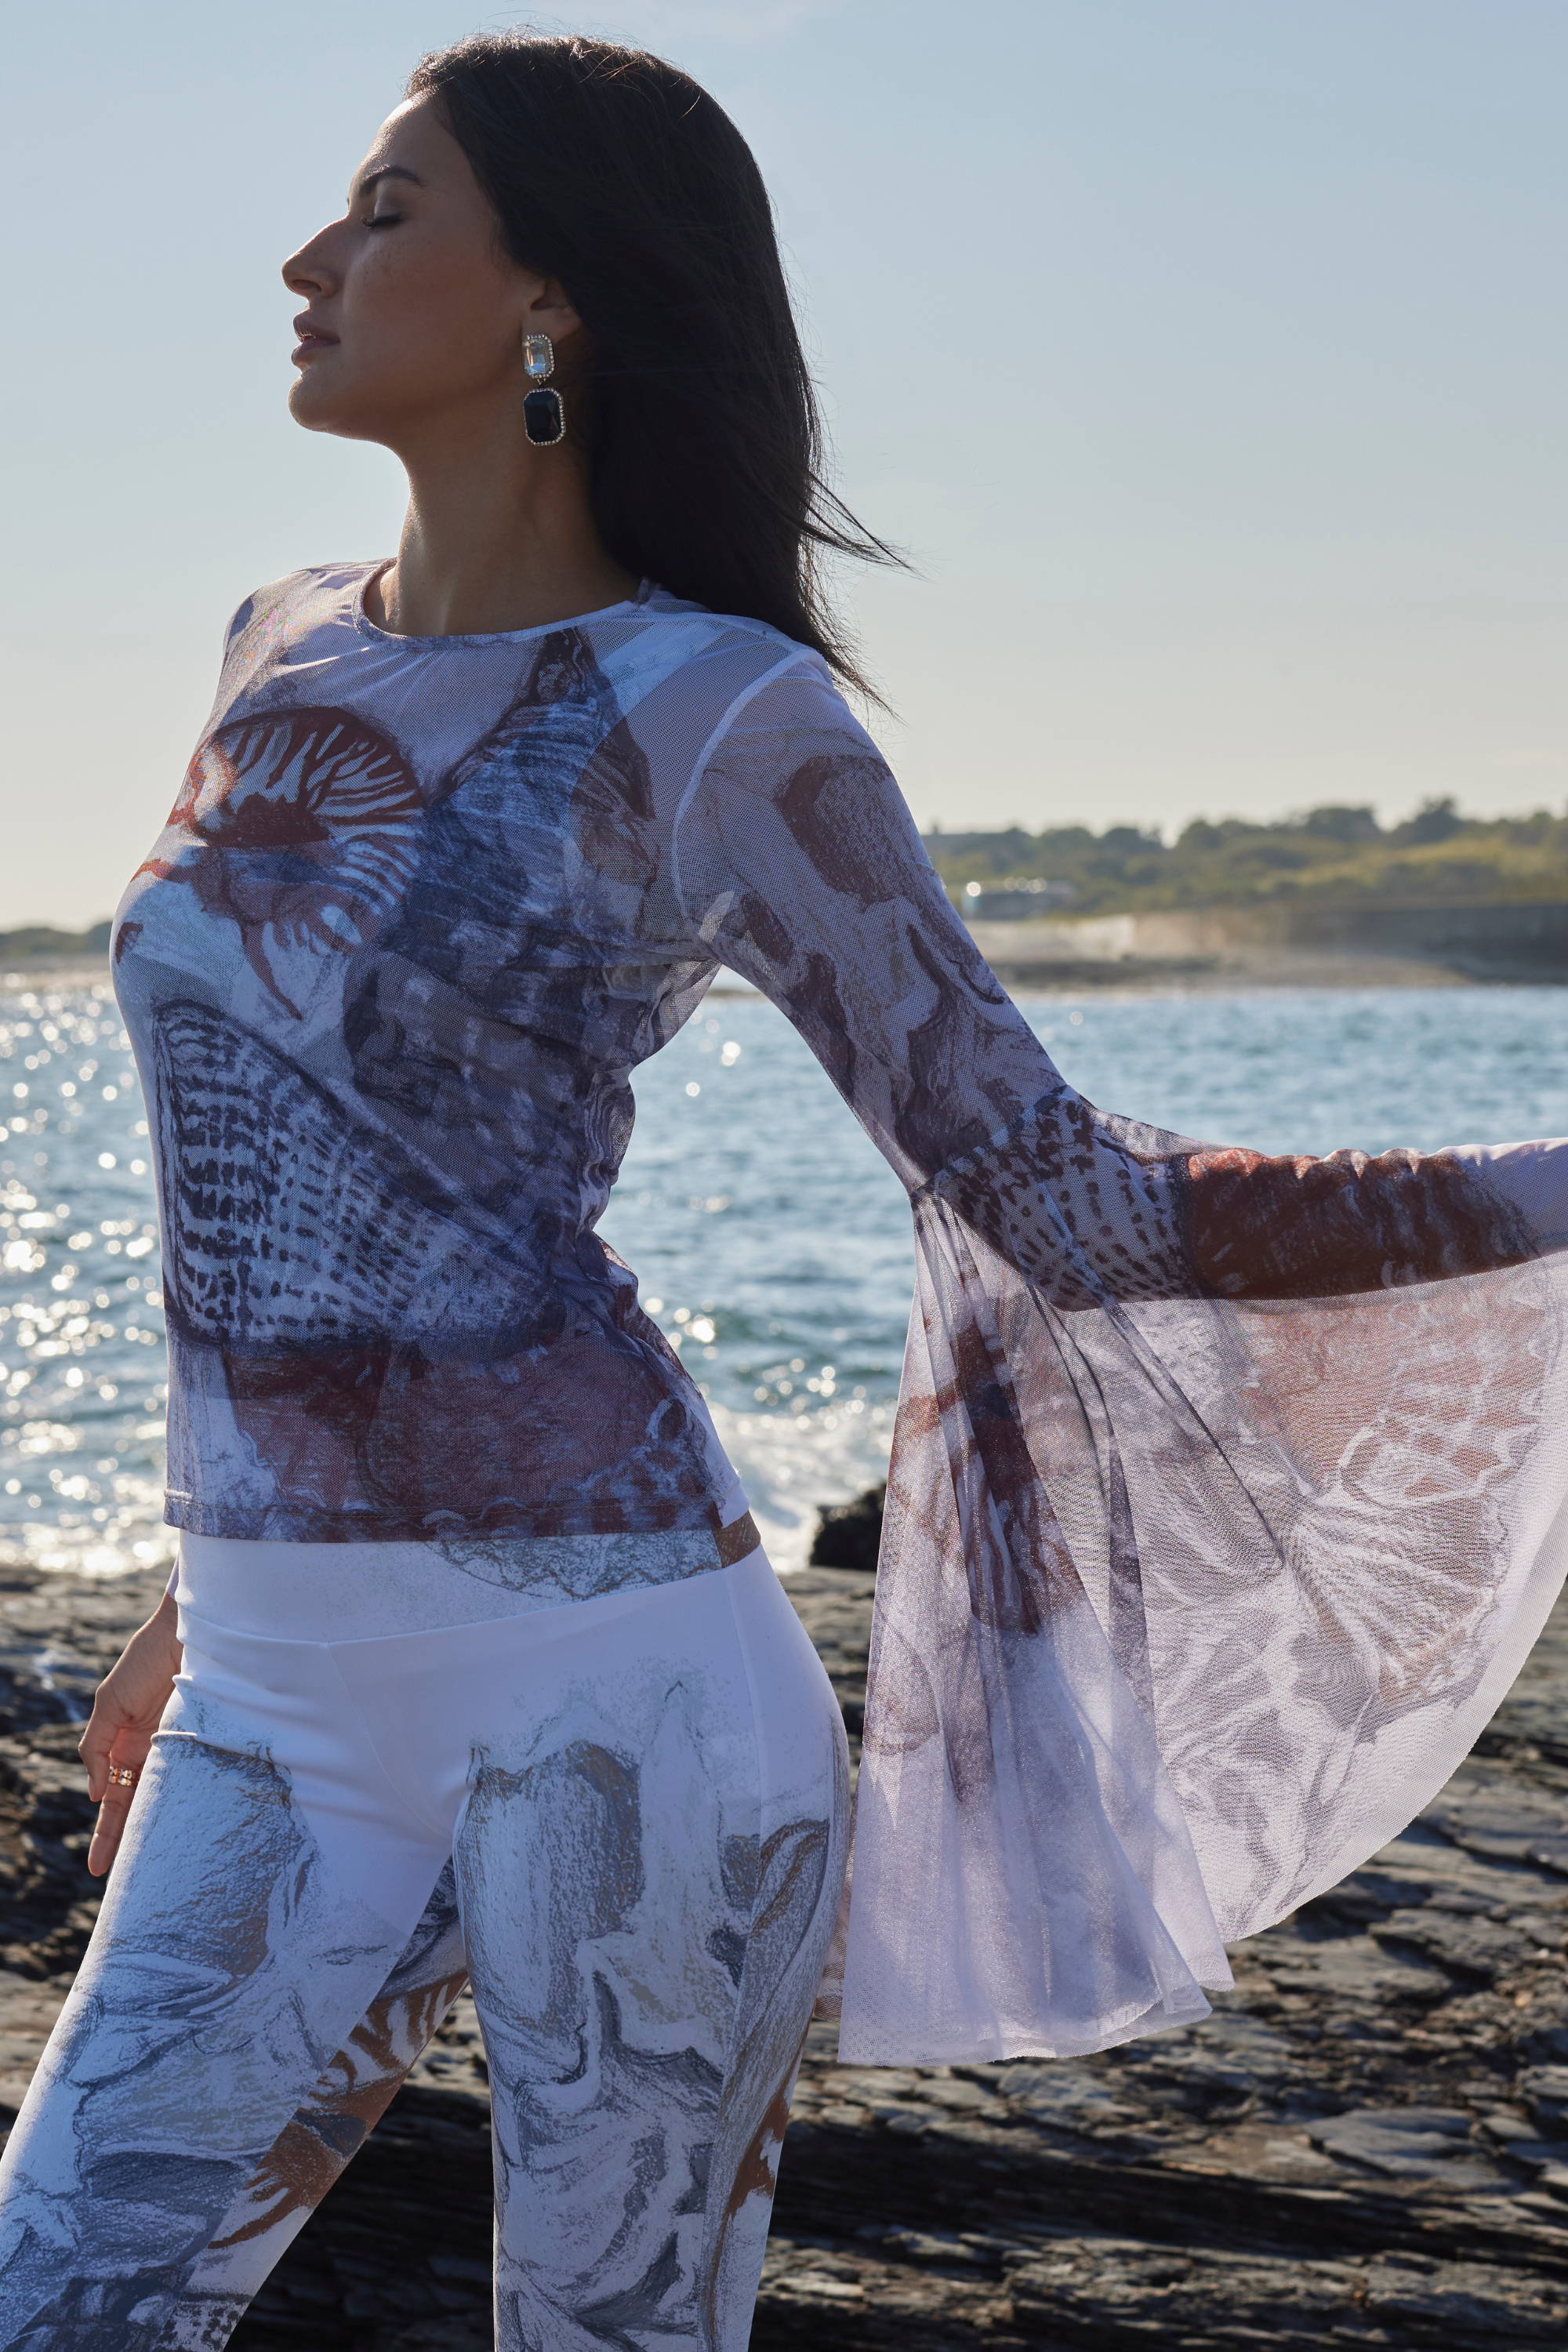 Woman wearing mesh printed top with fun sleeves and matching pants by the water by Ala von Auersperg